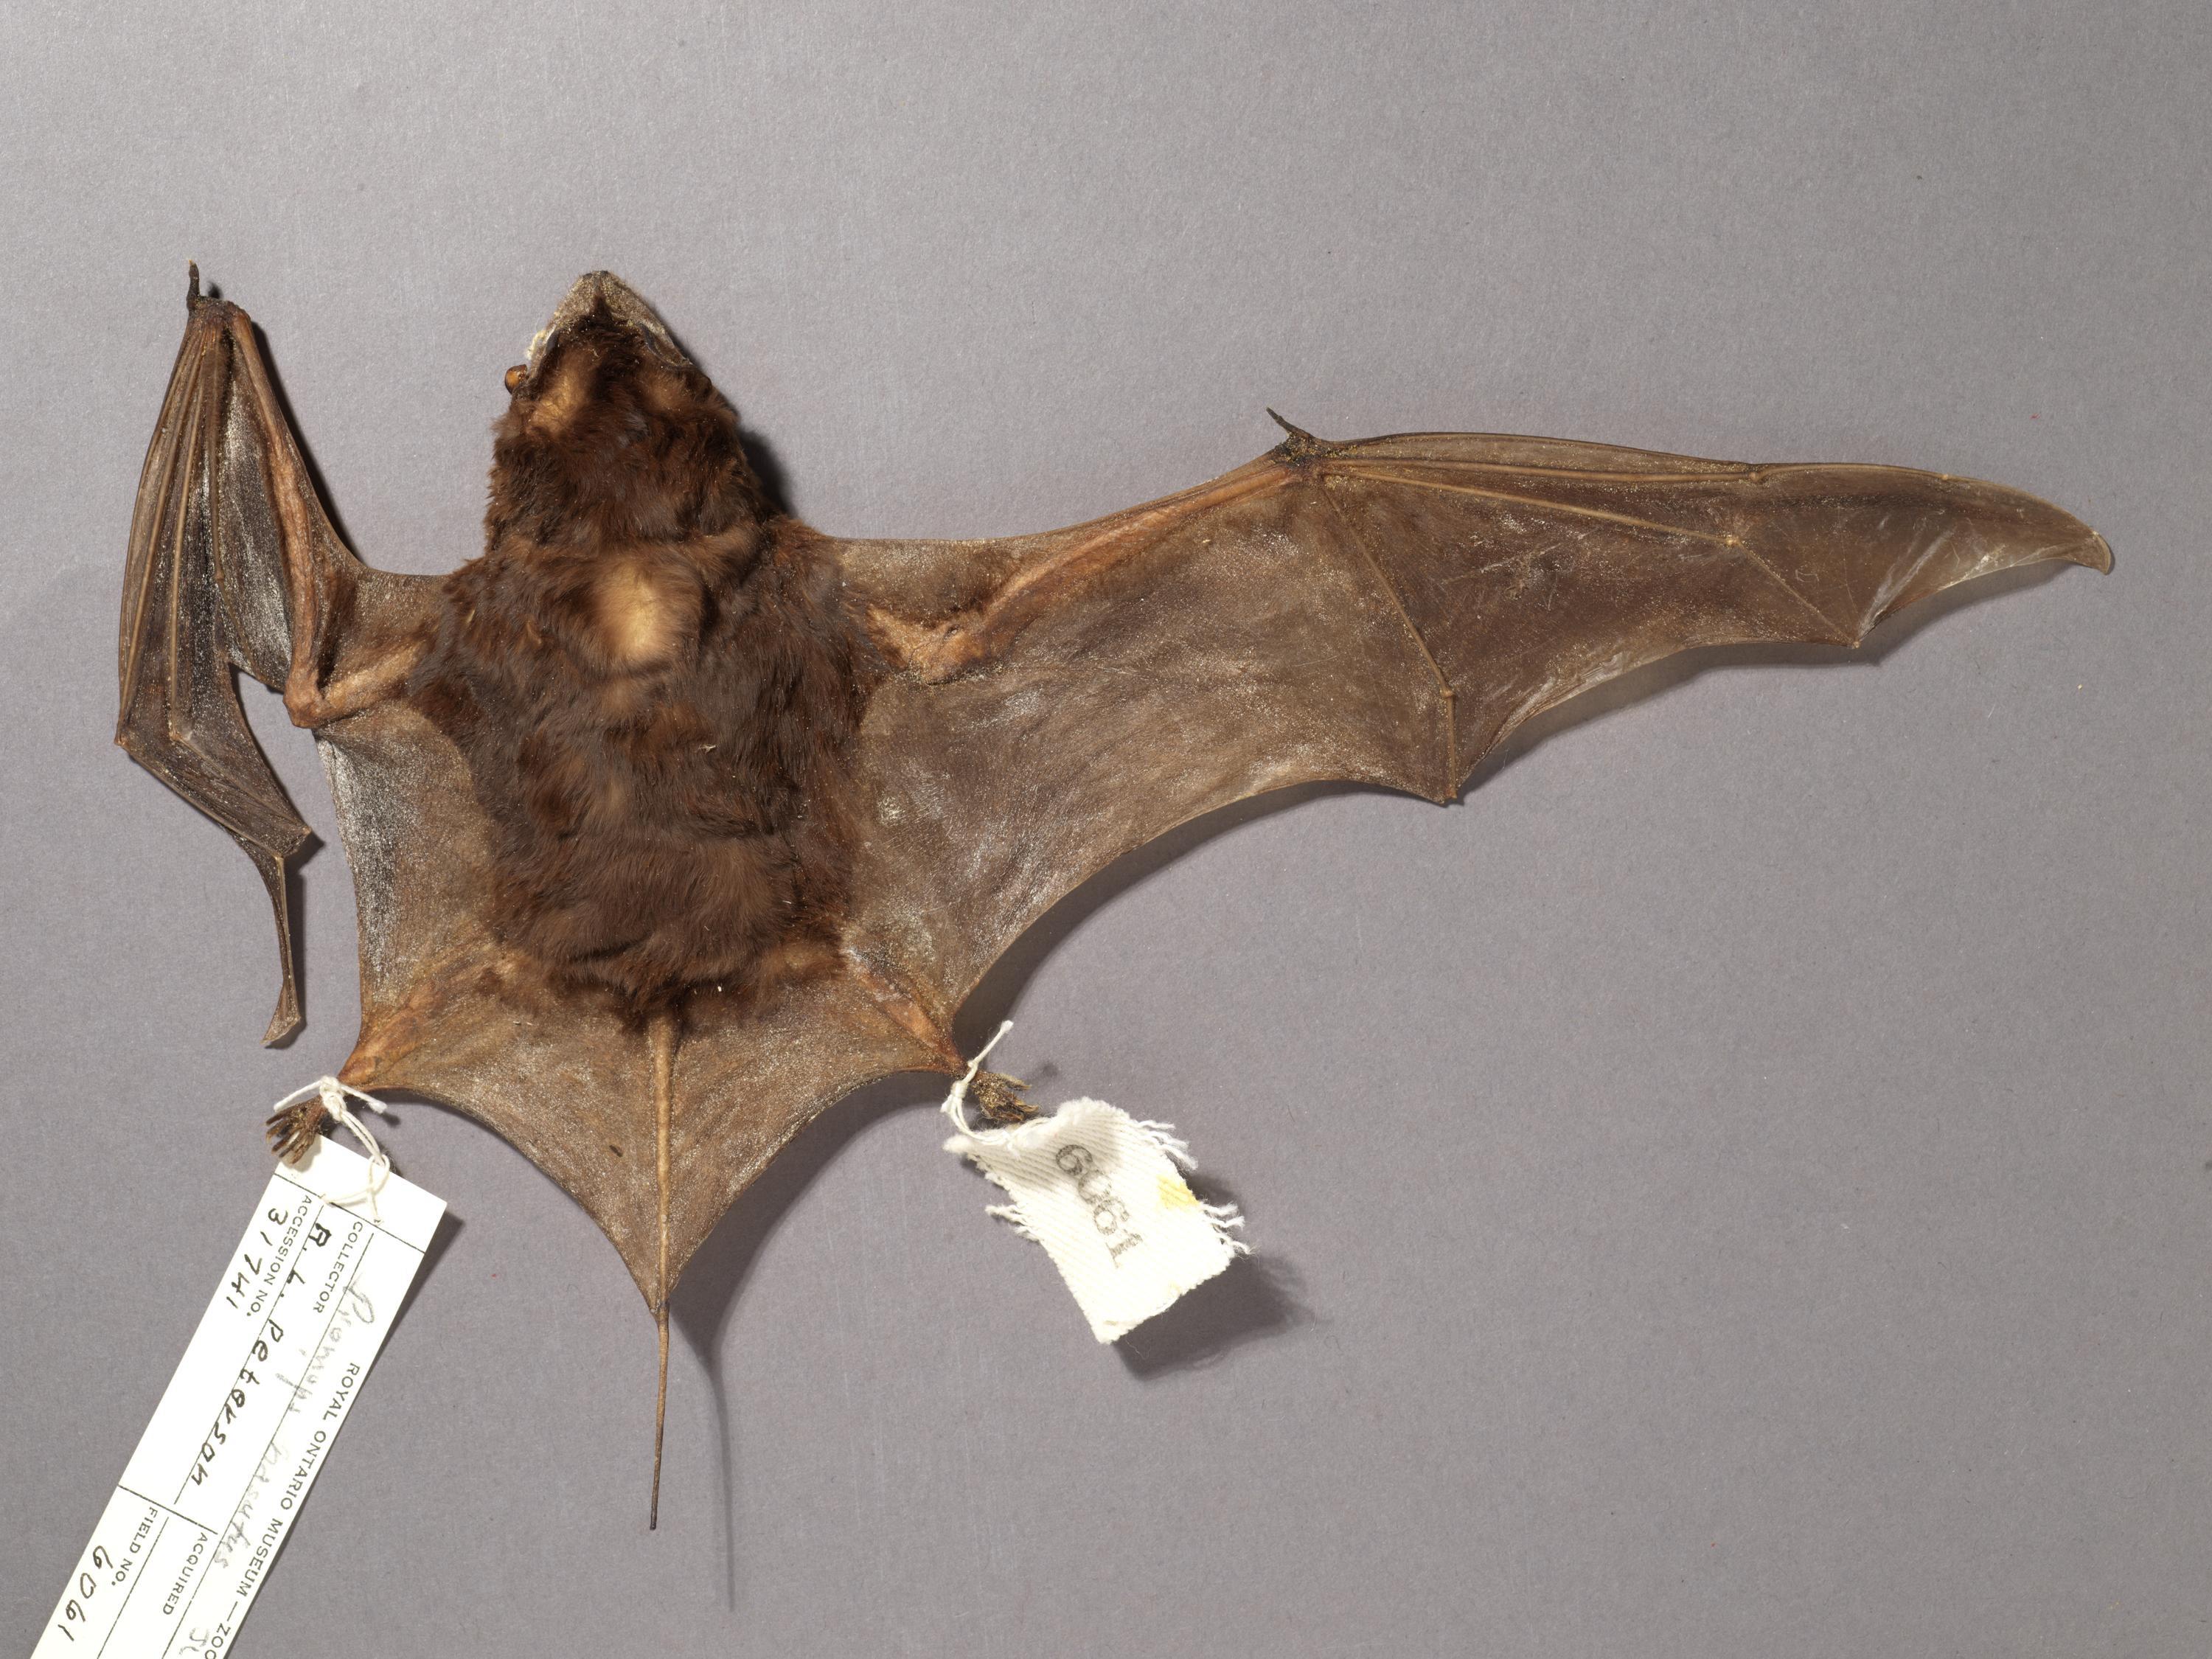 A small brown bat with one wing outstretched showing the thumb and finger bones.